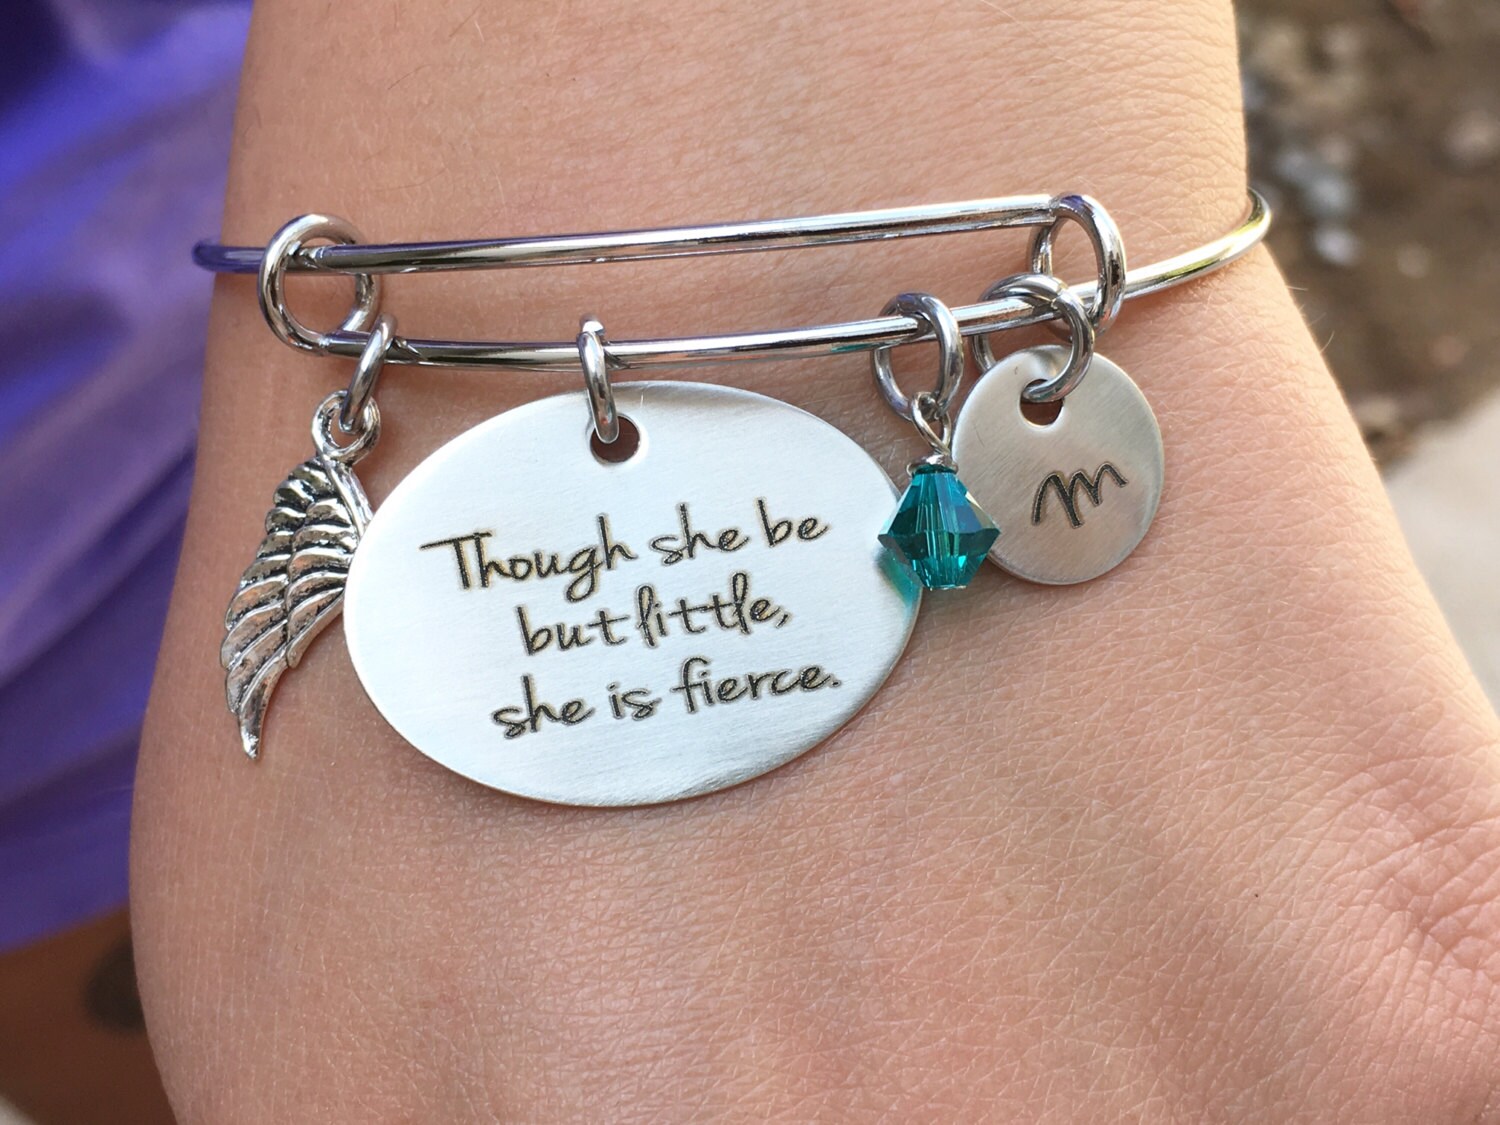 Though she be but little, she is fierce | Inspiration bangle bracelet | Mantra Bangles | Graduation Gift | Gift for Her | Personalized